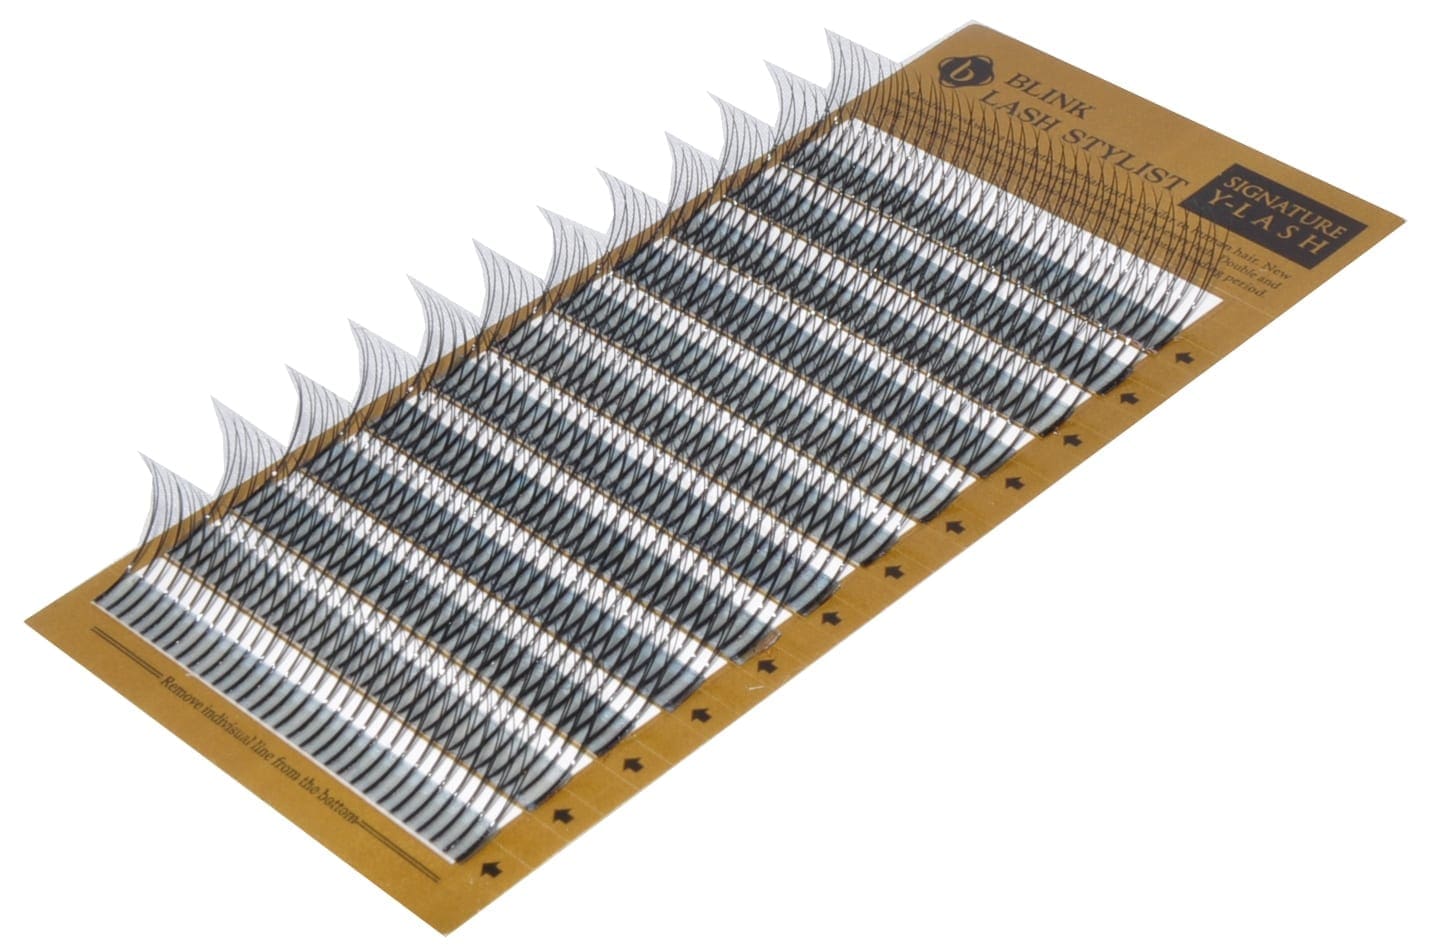 A wooden board with many rows of metal nails.